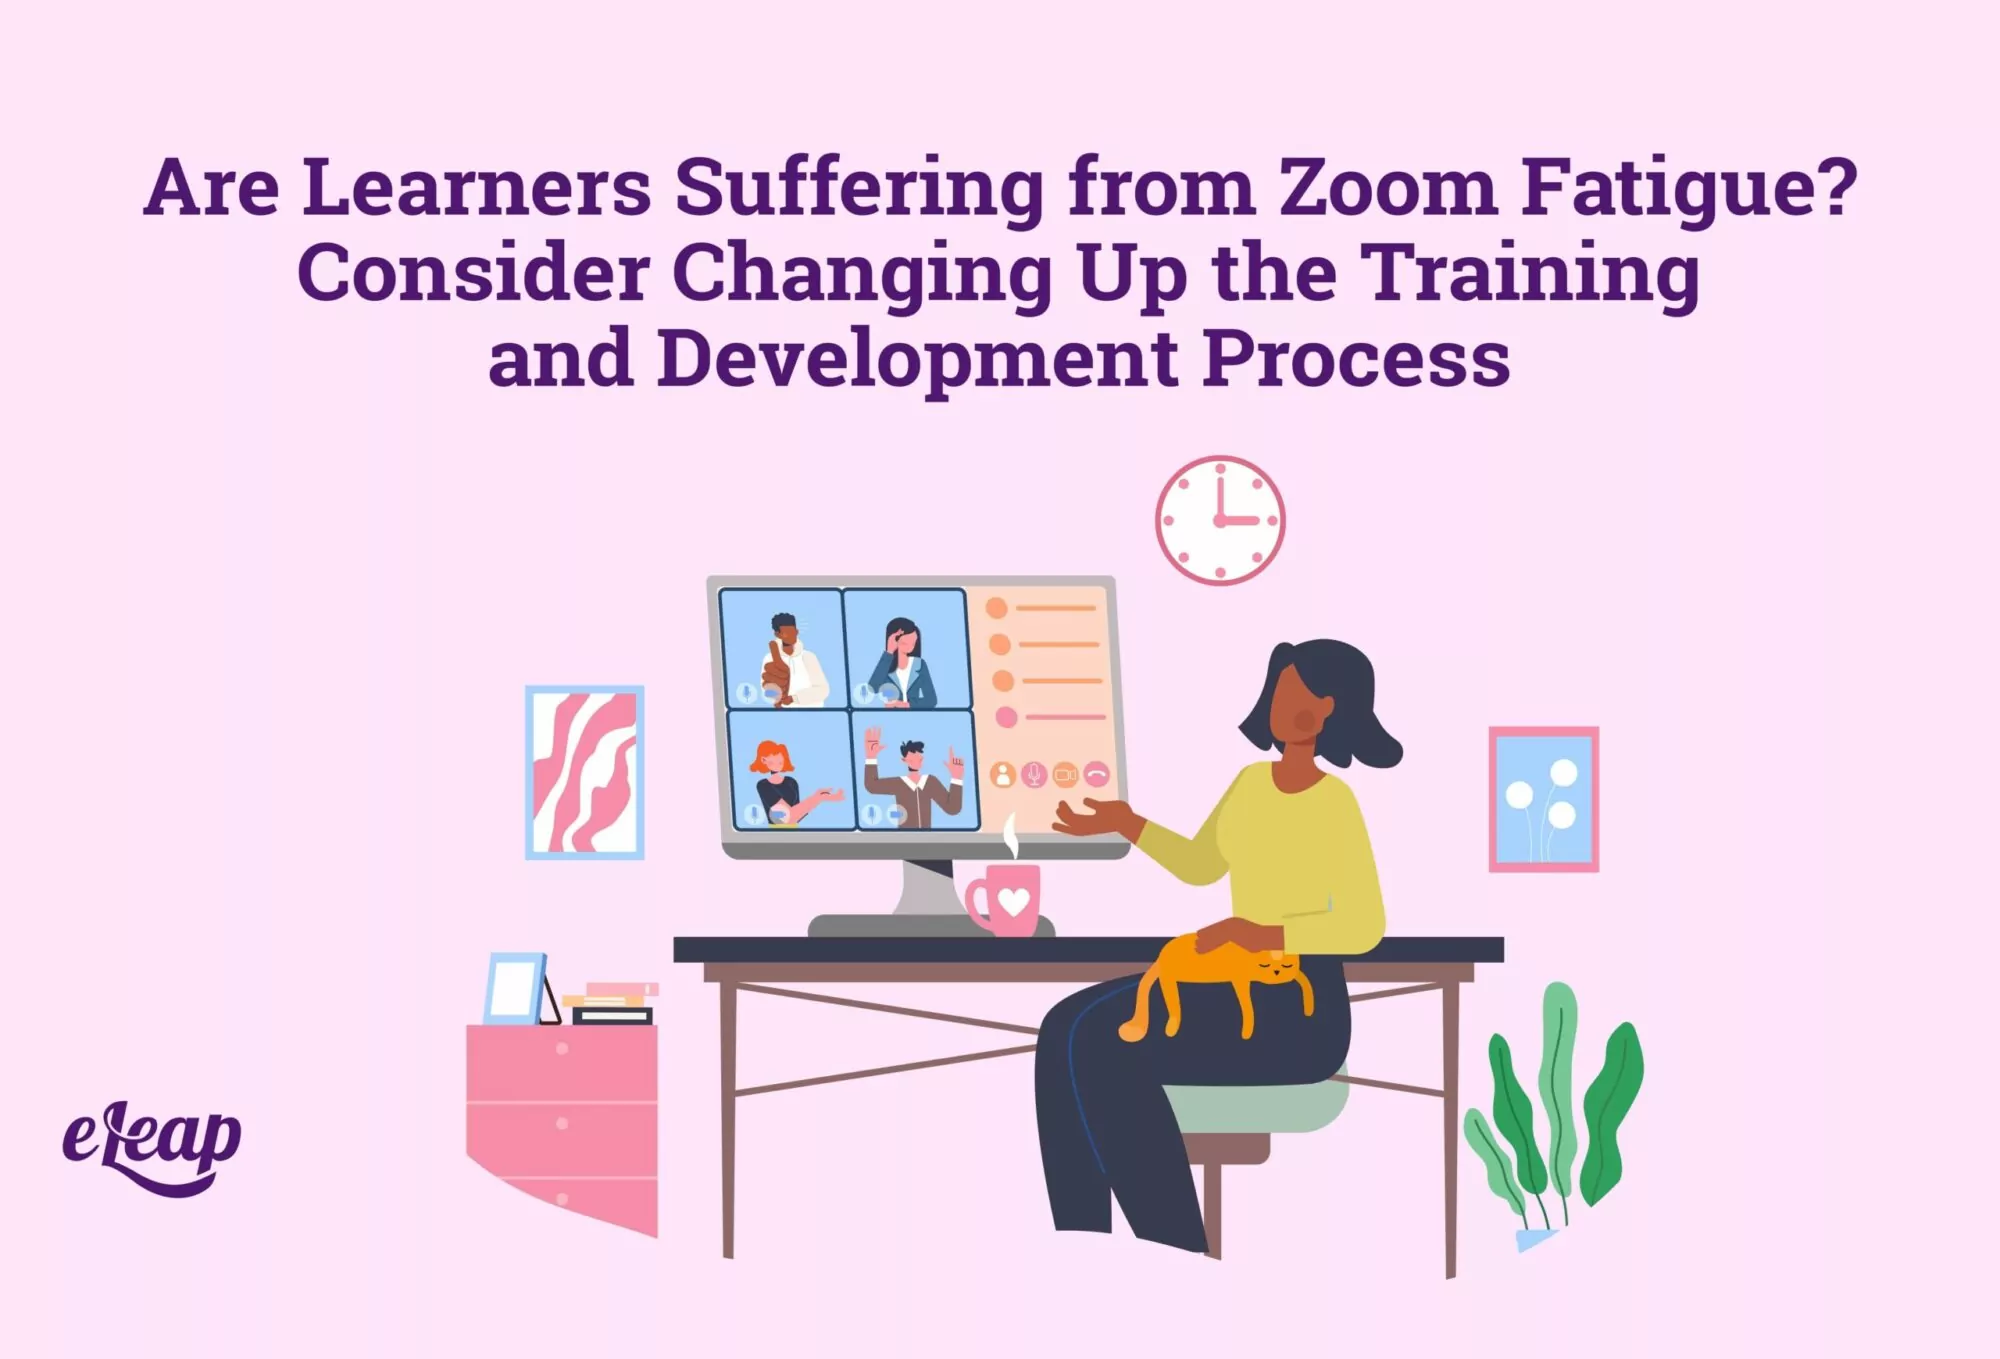 Are Learners Suffering from Zoom Fatigue? Consider Changing Up the Training and Development Process